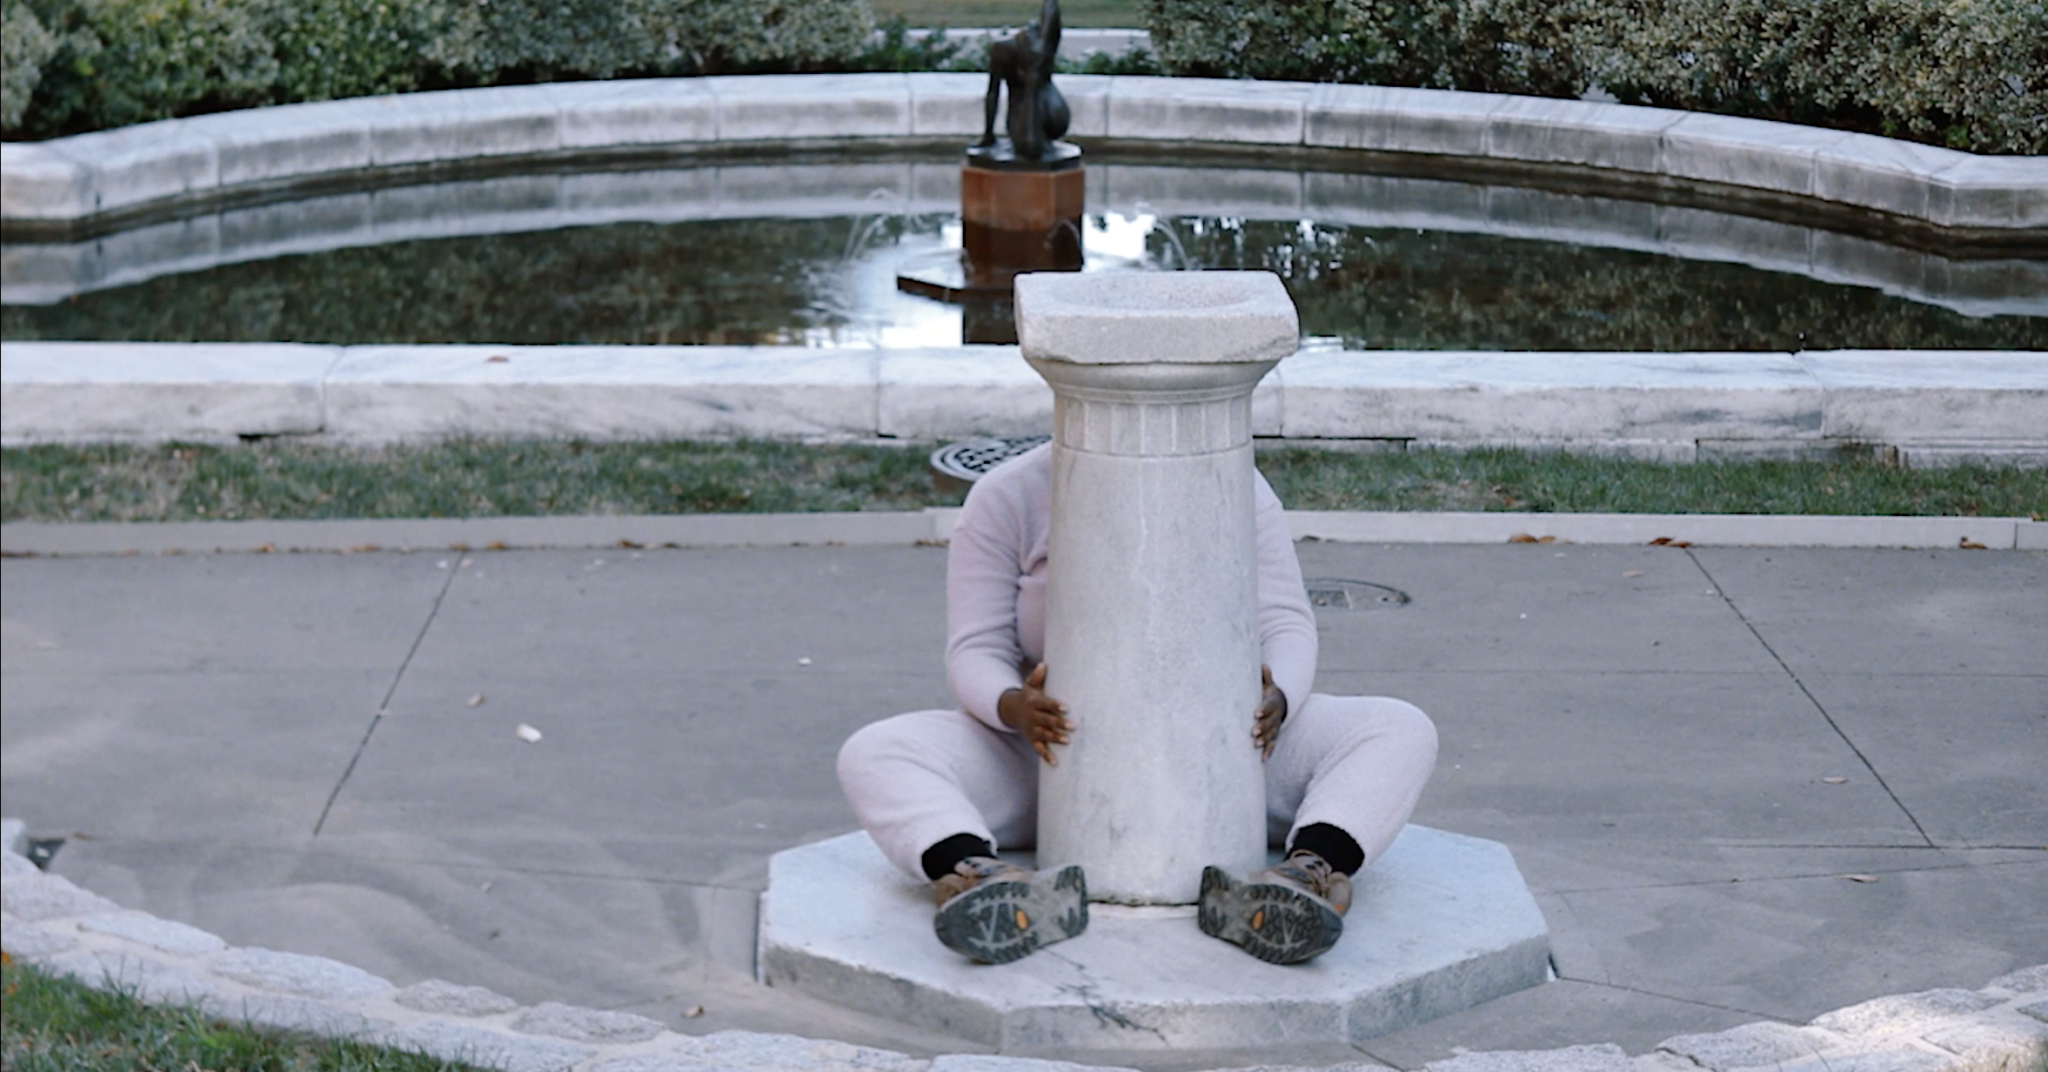 A person, visible only by their arms and legs, is wrapped around a marble pedestal.